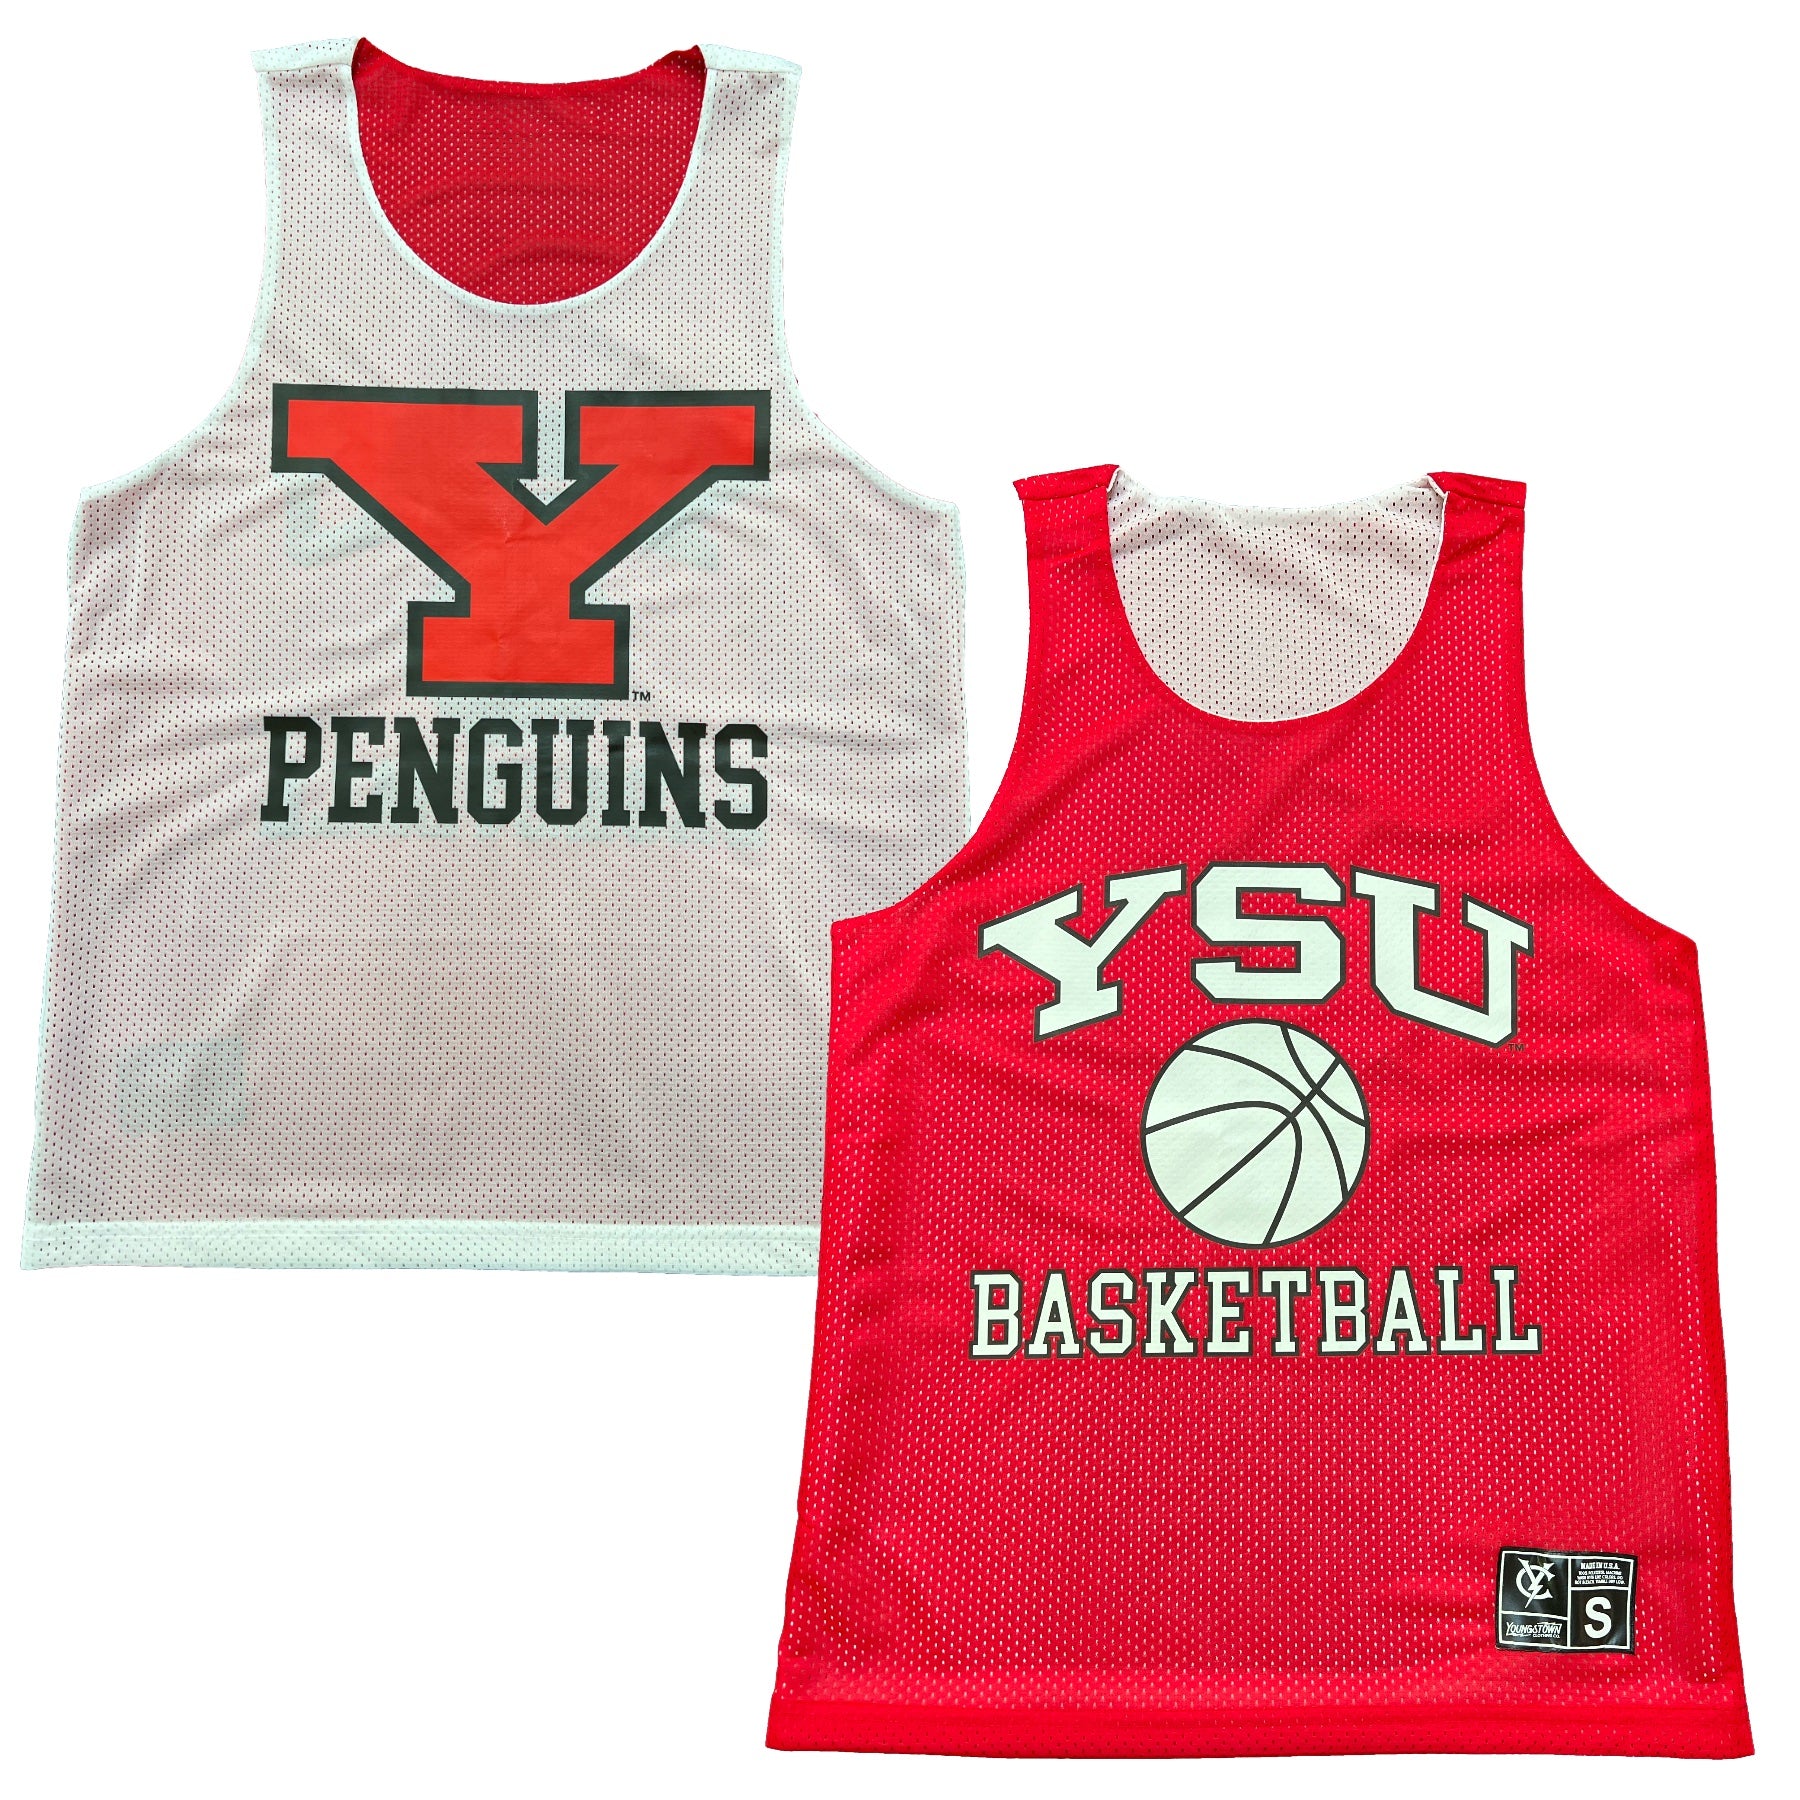 Youngstown State Basketball Jersey